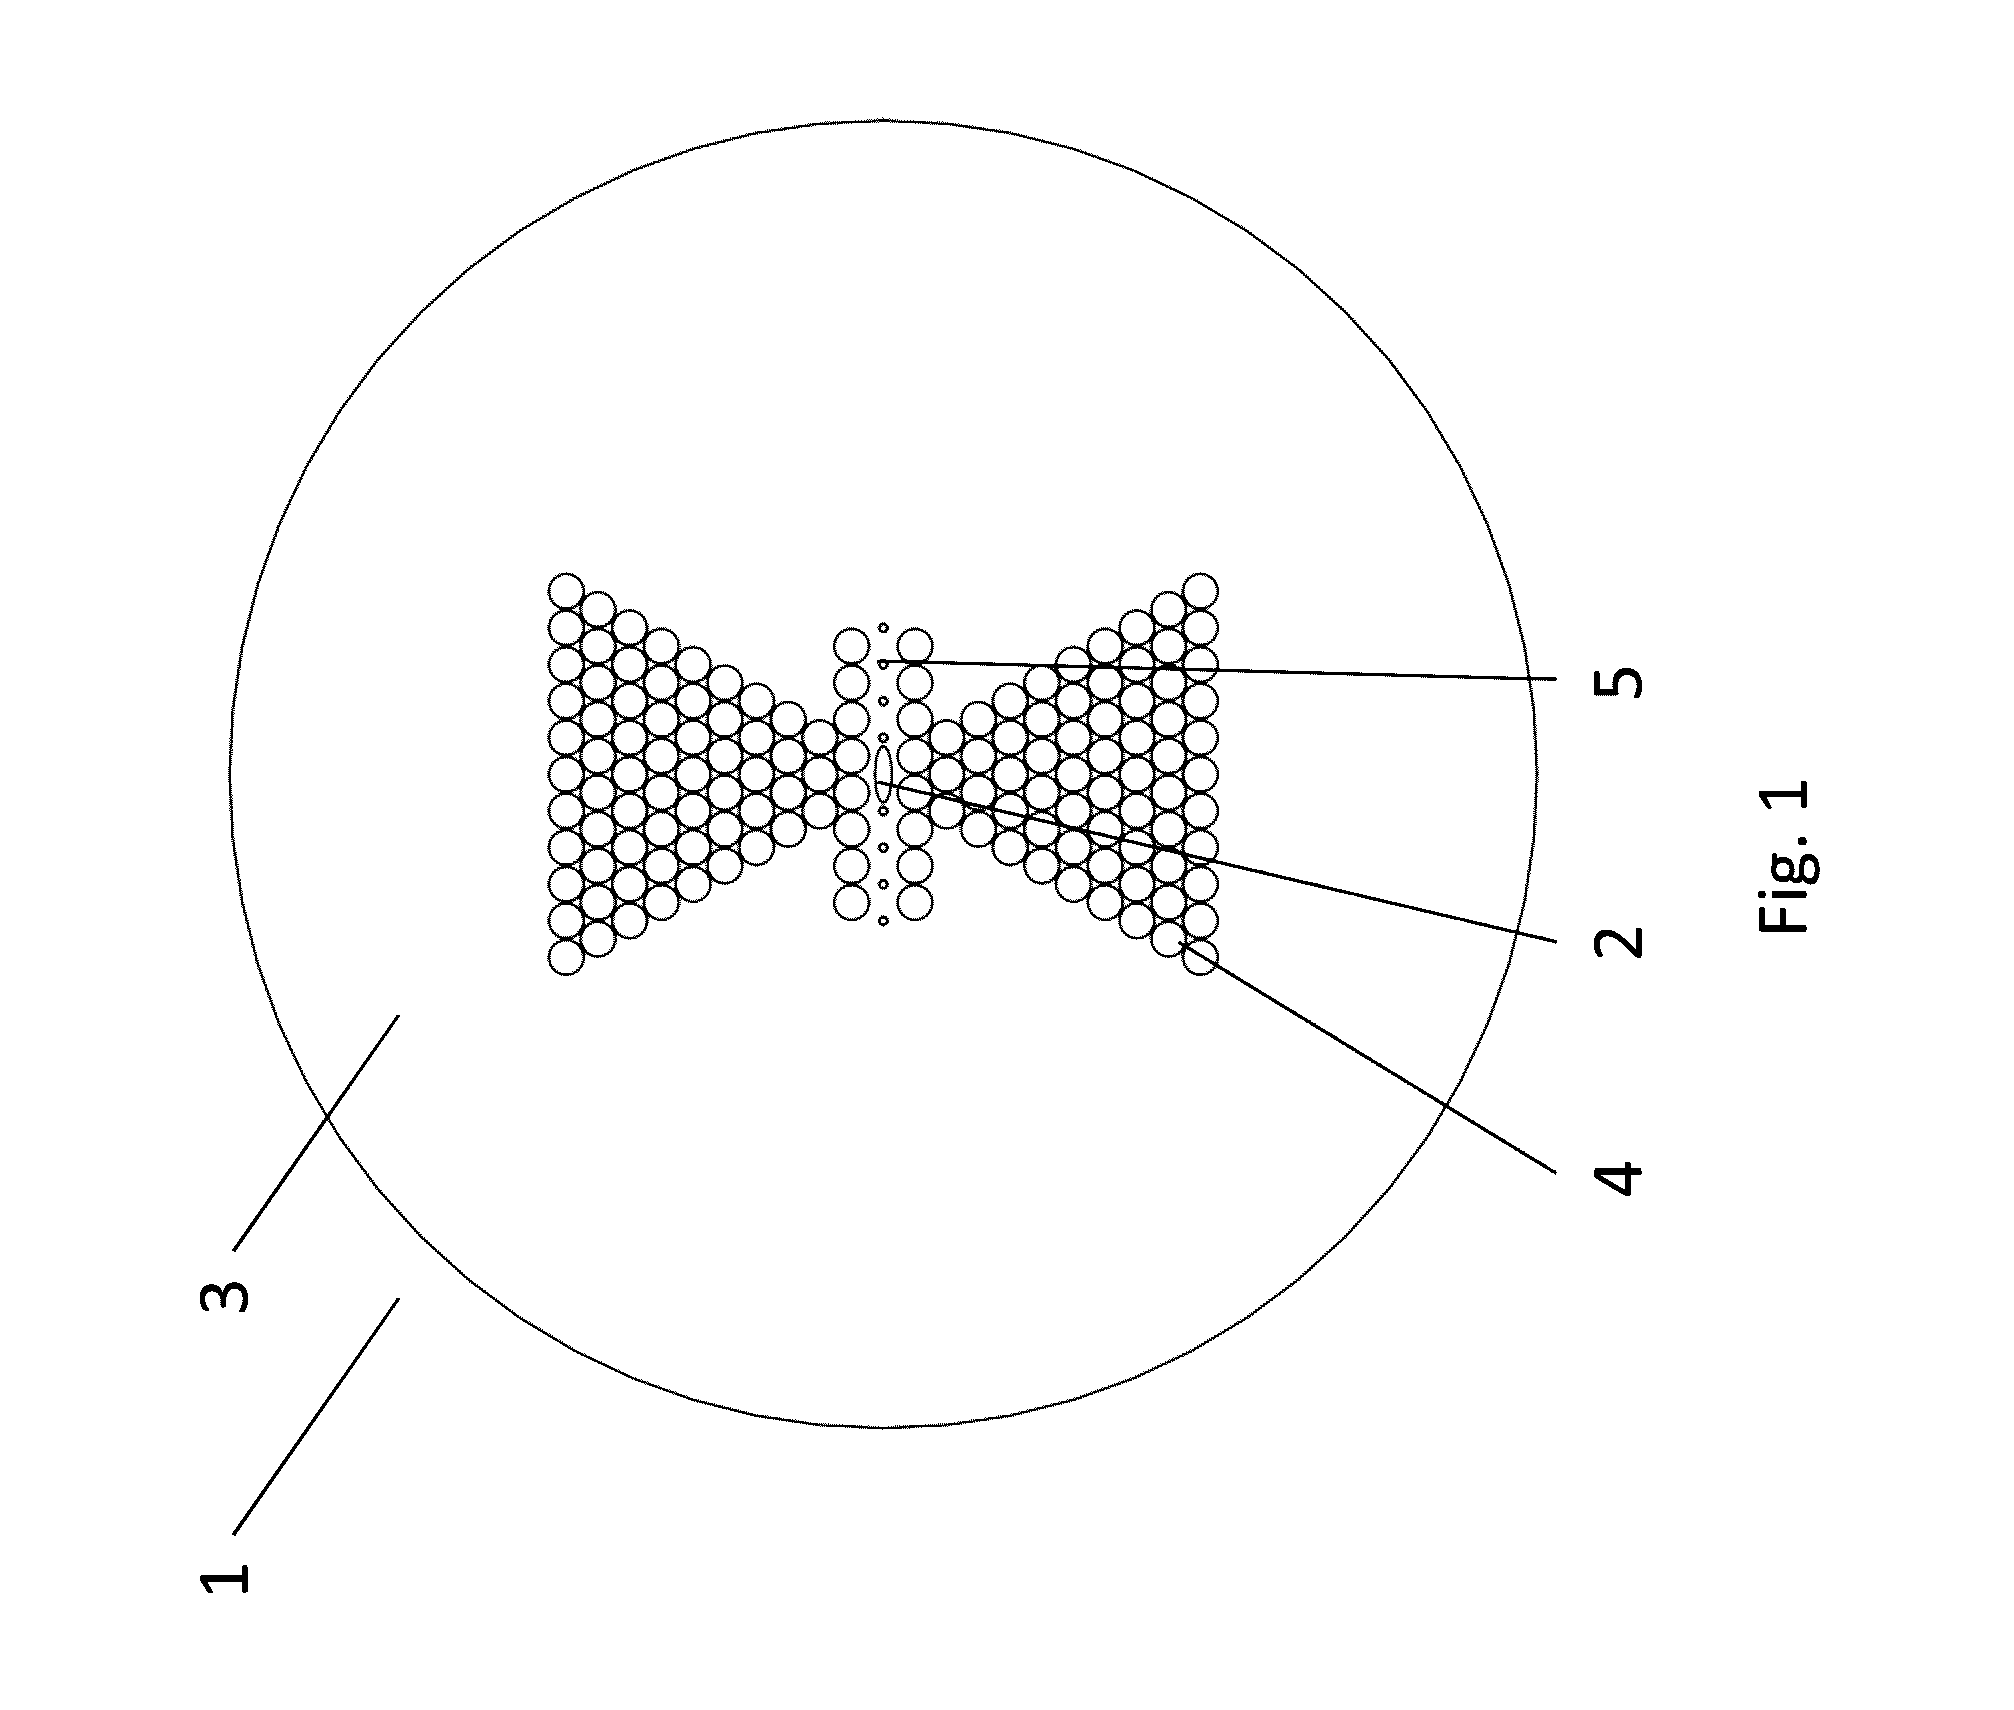 Microstructured Optical Fibre, Composite Structure, Method and Use for Measuring Shear Load in a Composite Structure